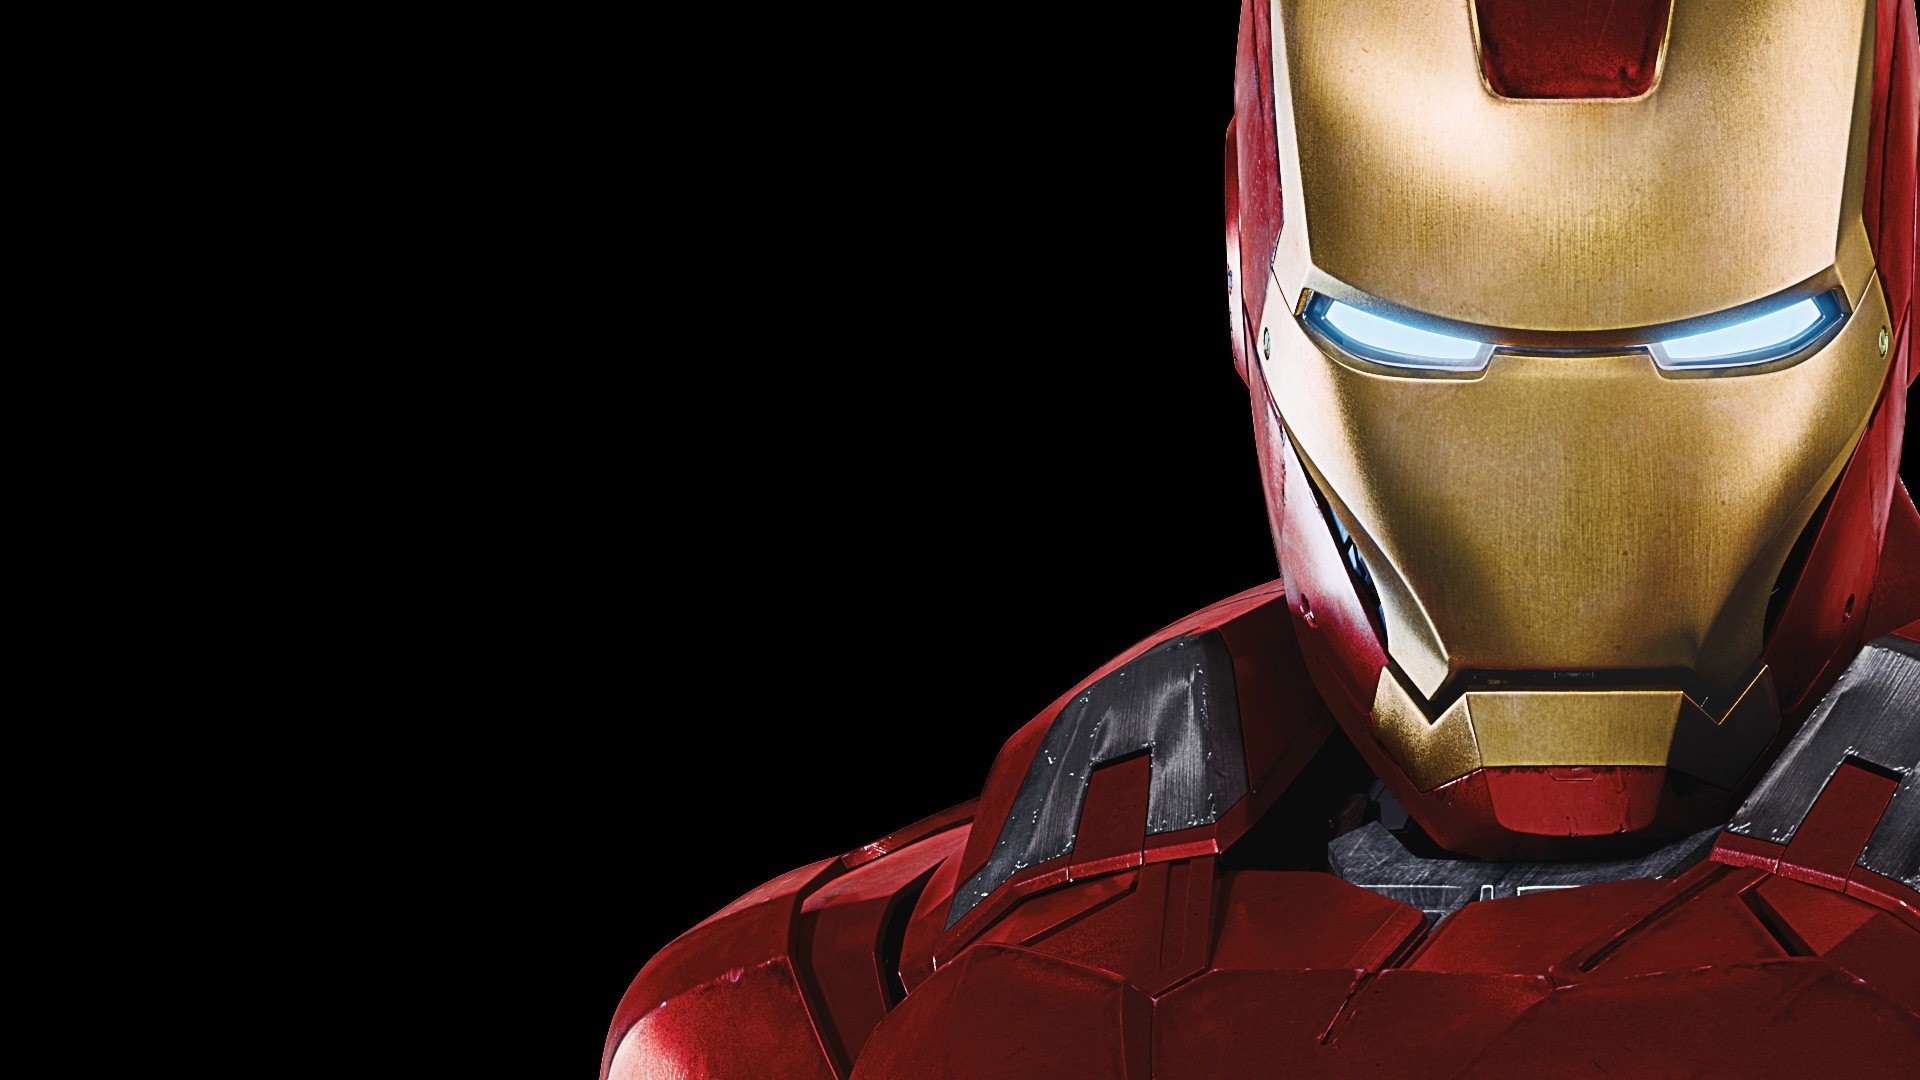 ironman hd wallpapers images HD Wallpapers Buzz 1863Ã1046 Iron Man Hd  Wallpaper (41